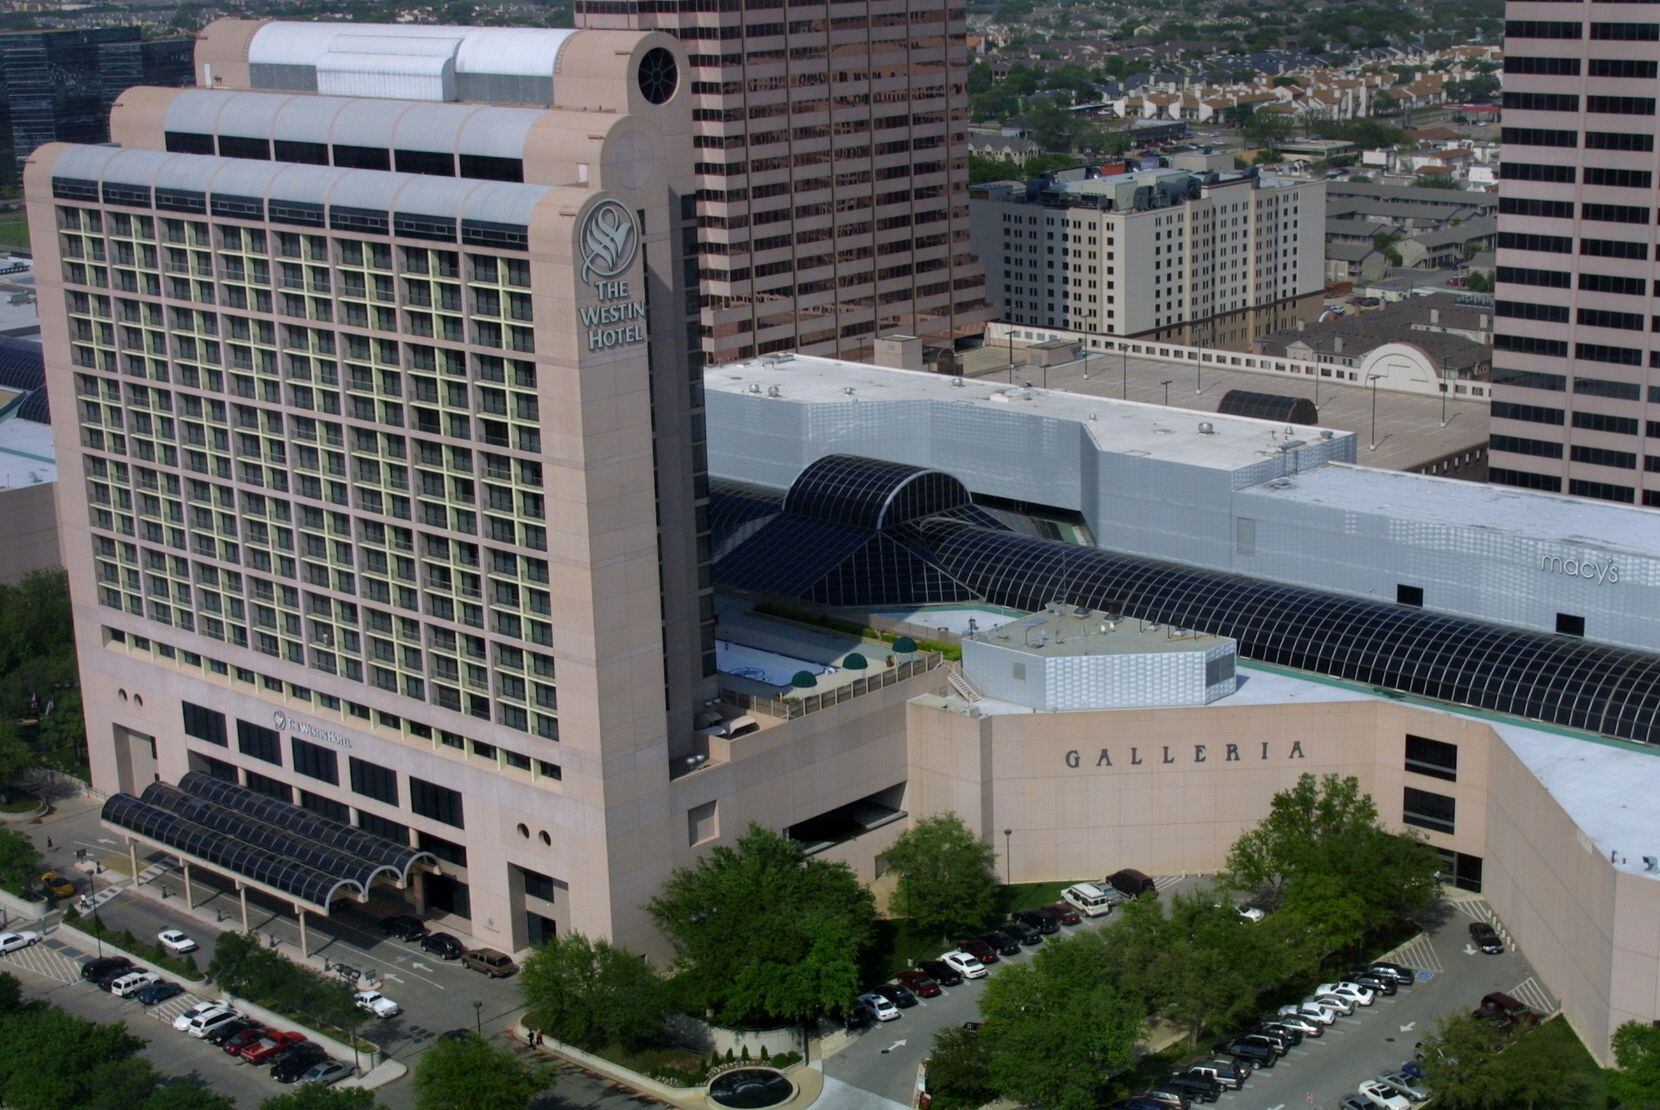 The Galleria mall with its Westin Hotel opened in 1982.